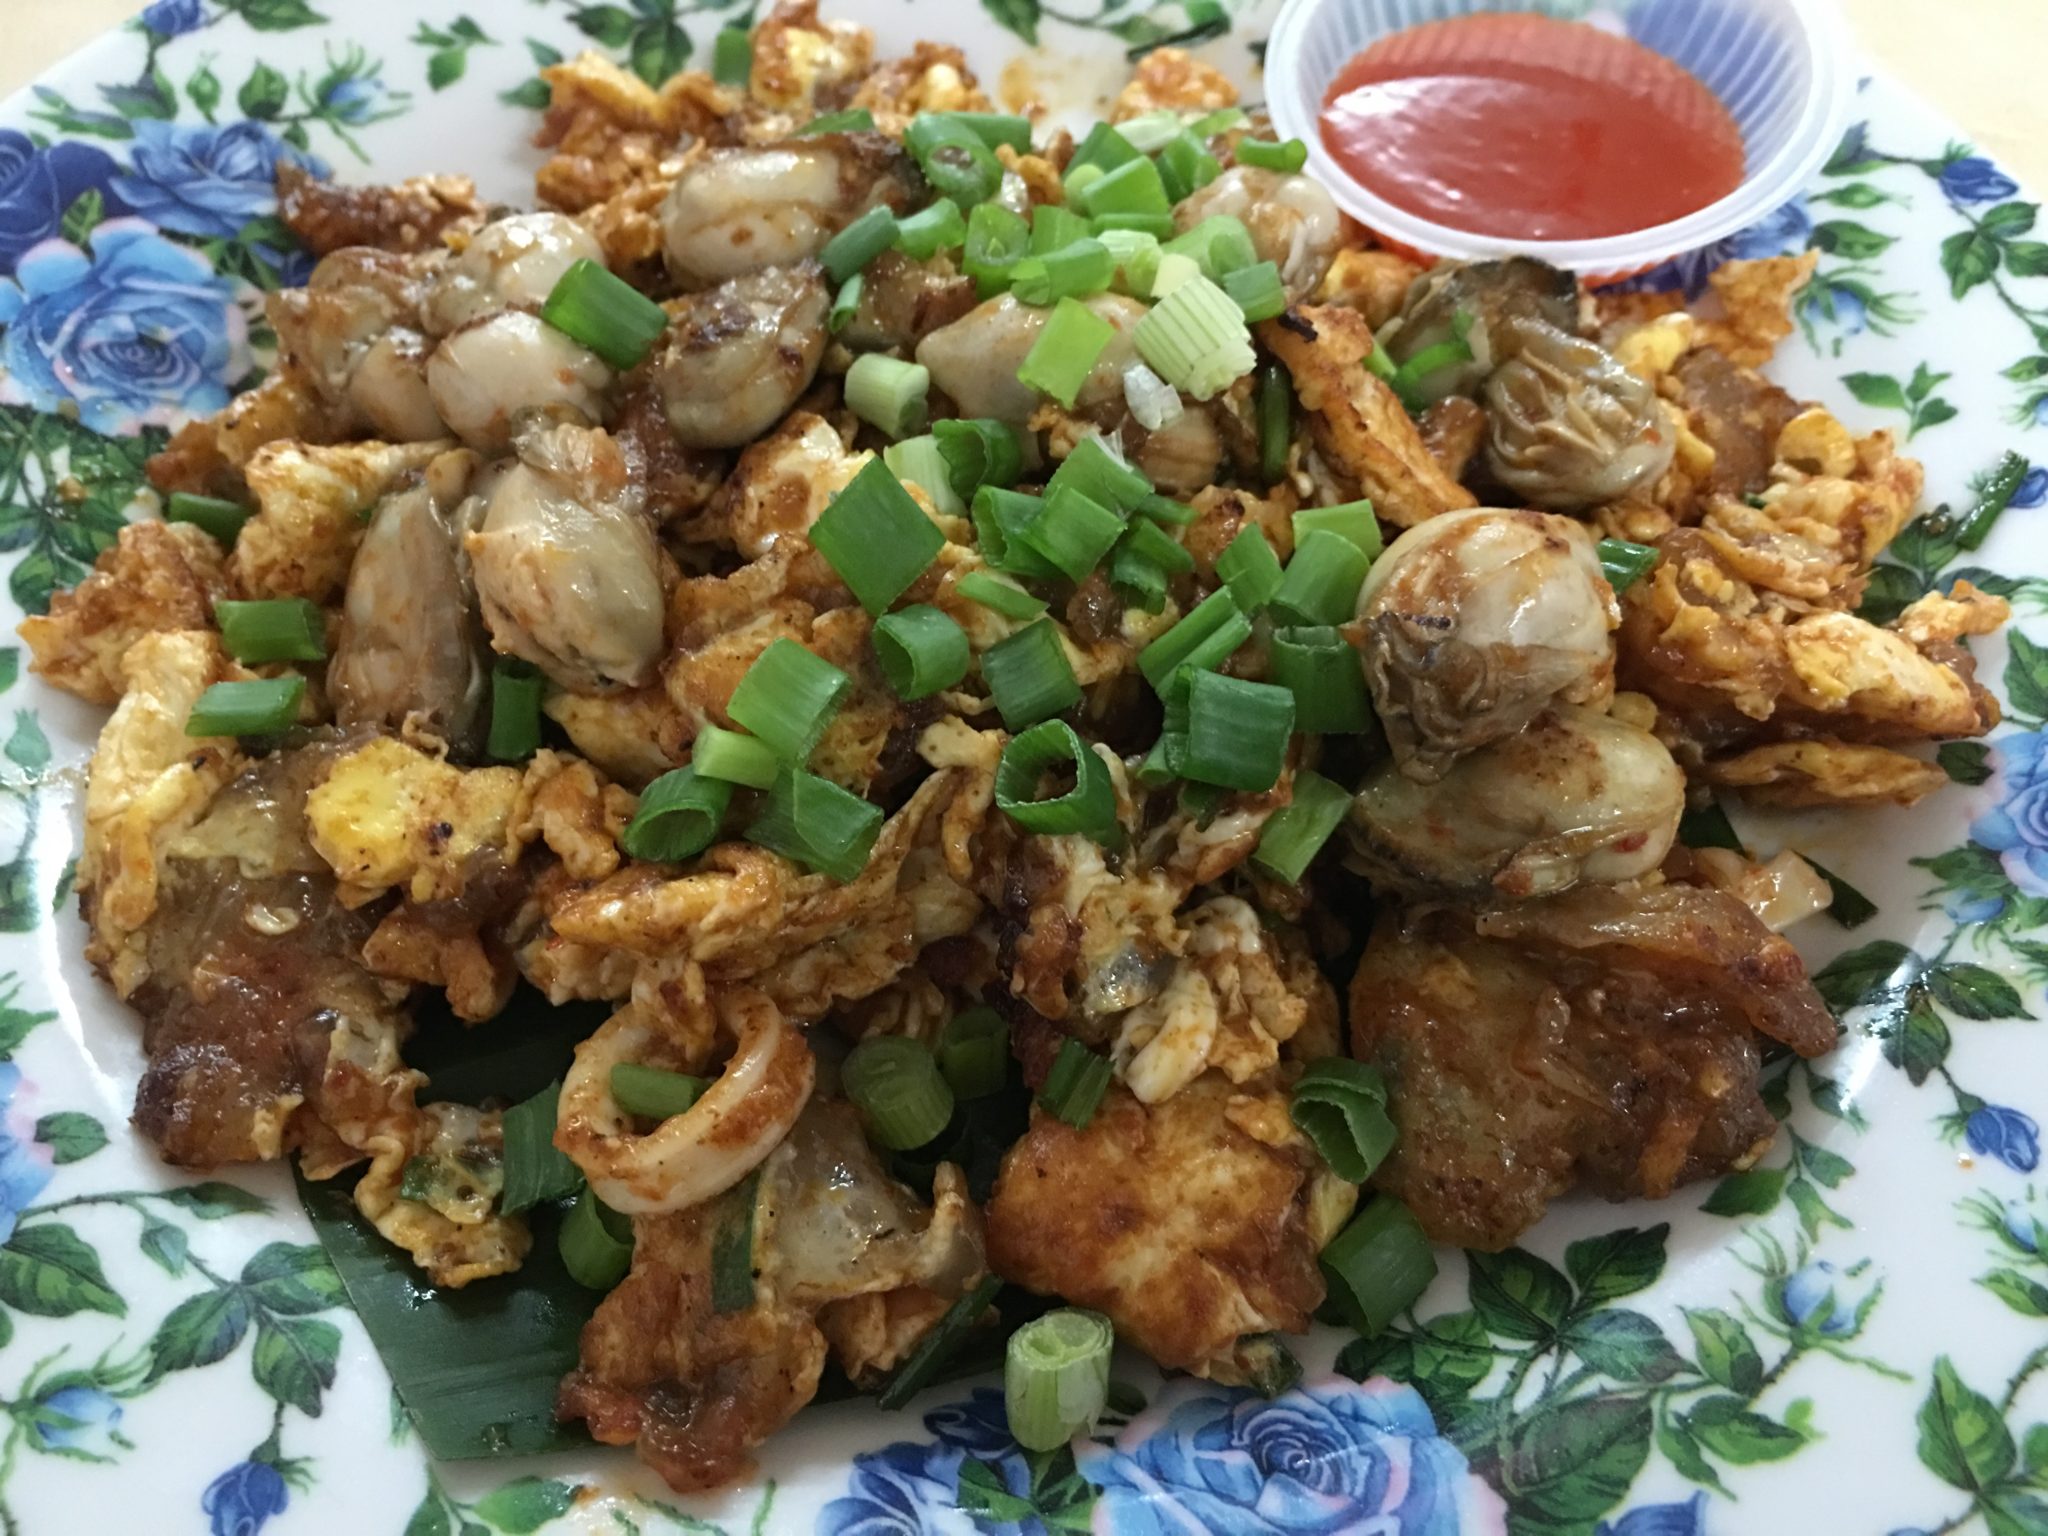 Oh Chien | Penang Food Guide | Food For Thought